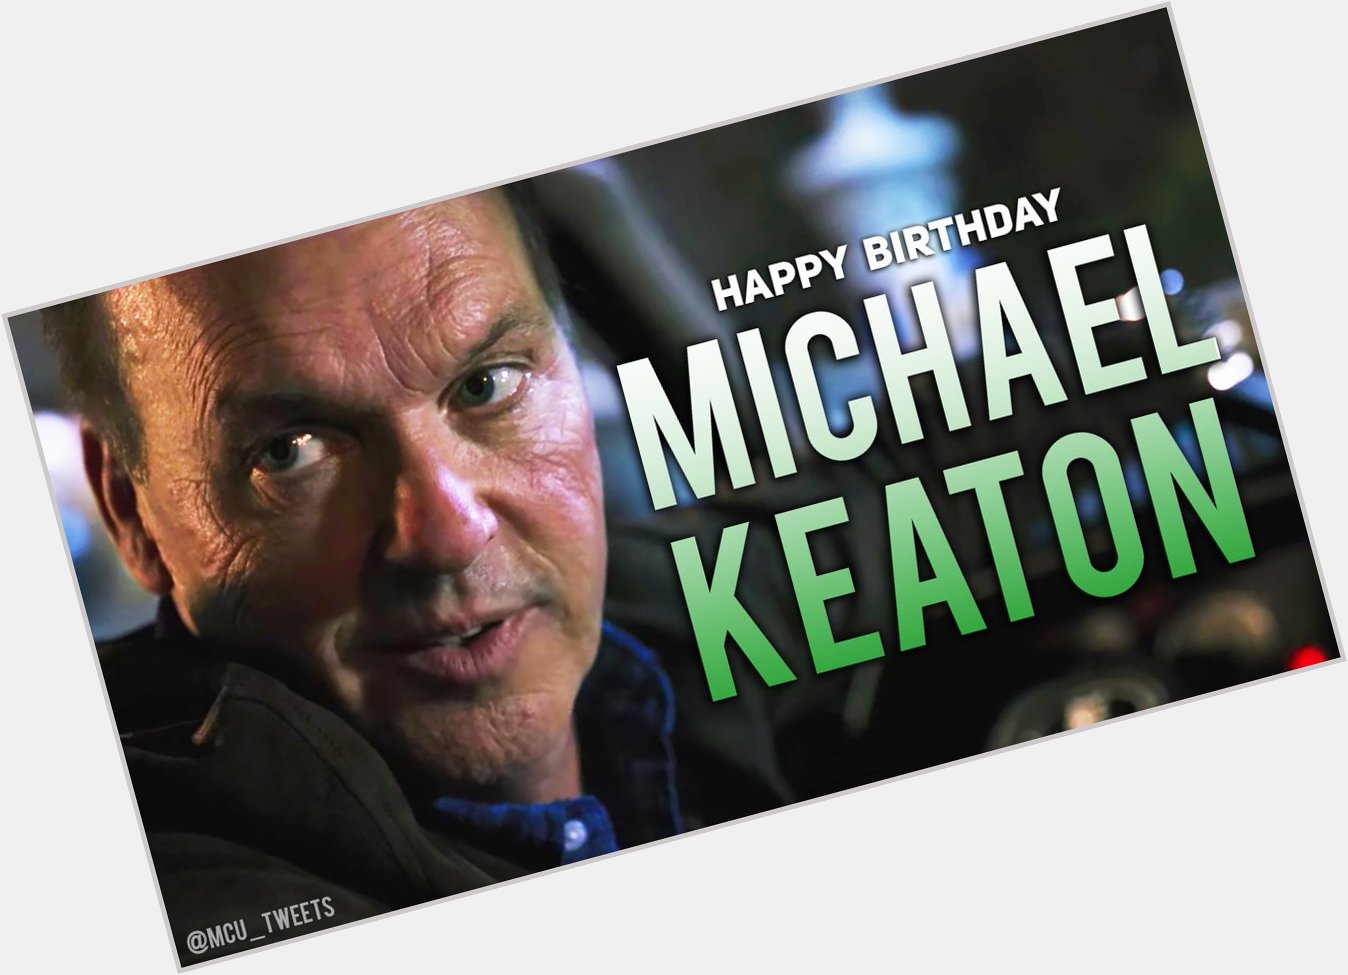 Join us in wishing the Adrian Toomes / Vulture of the MCU, actor Michael Keaton, a very happy 66th birthday! 